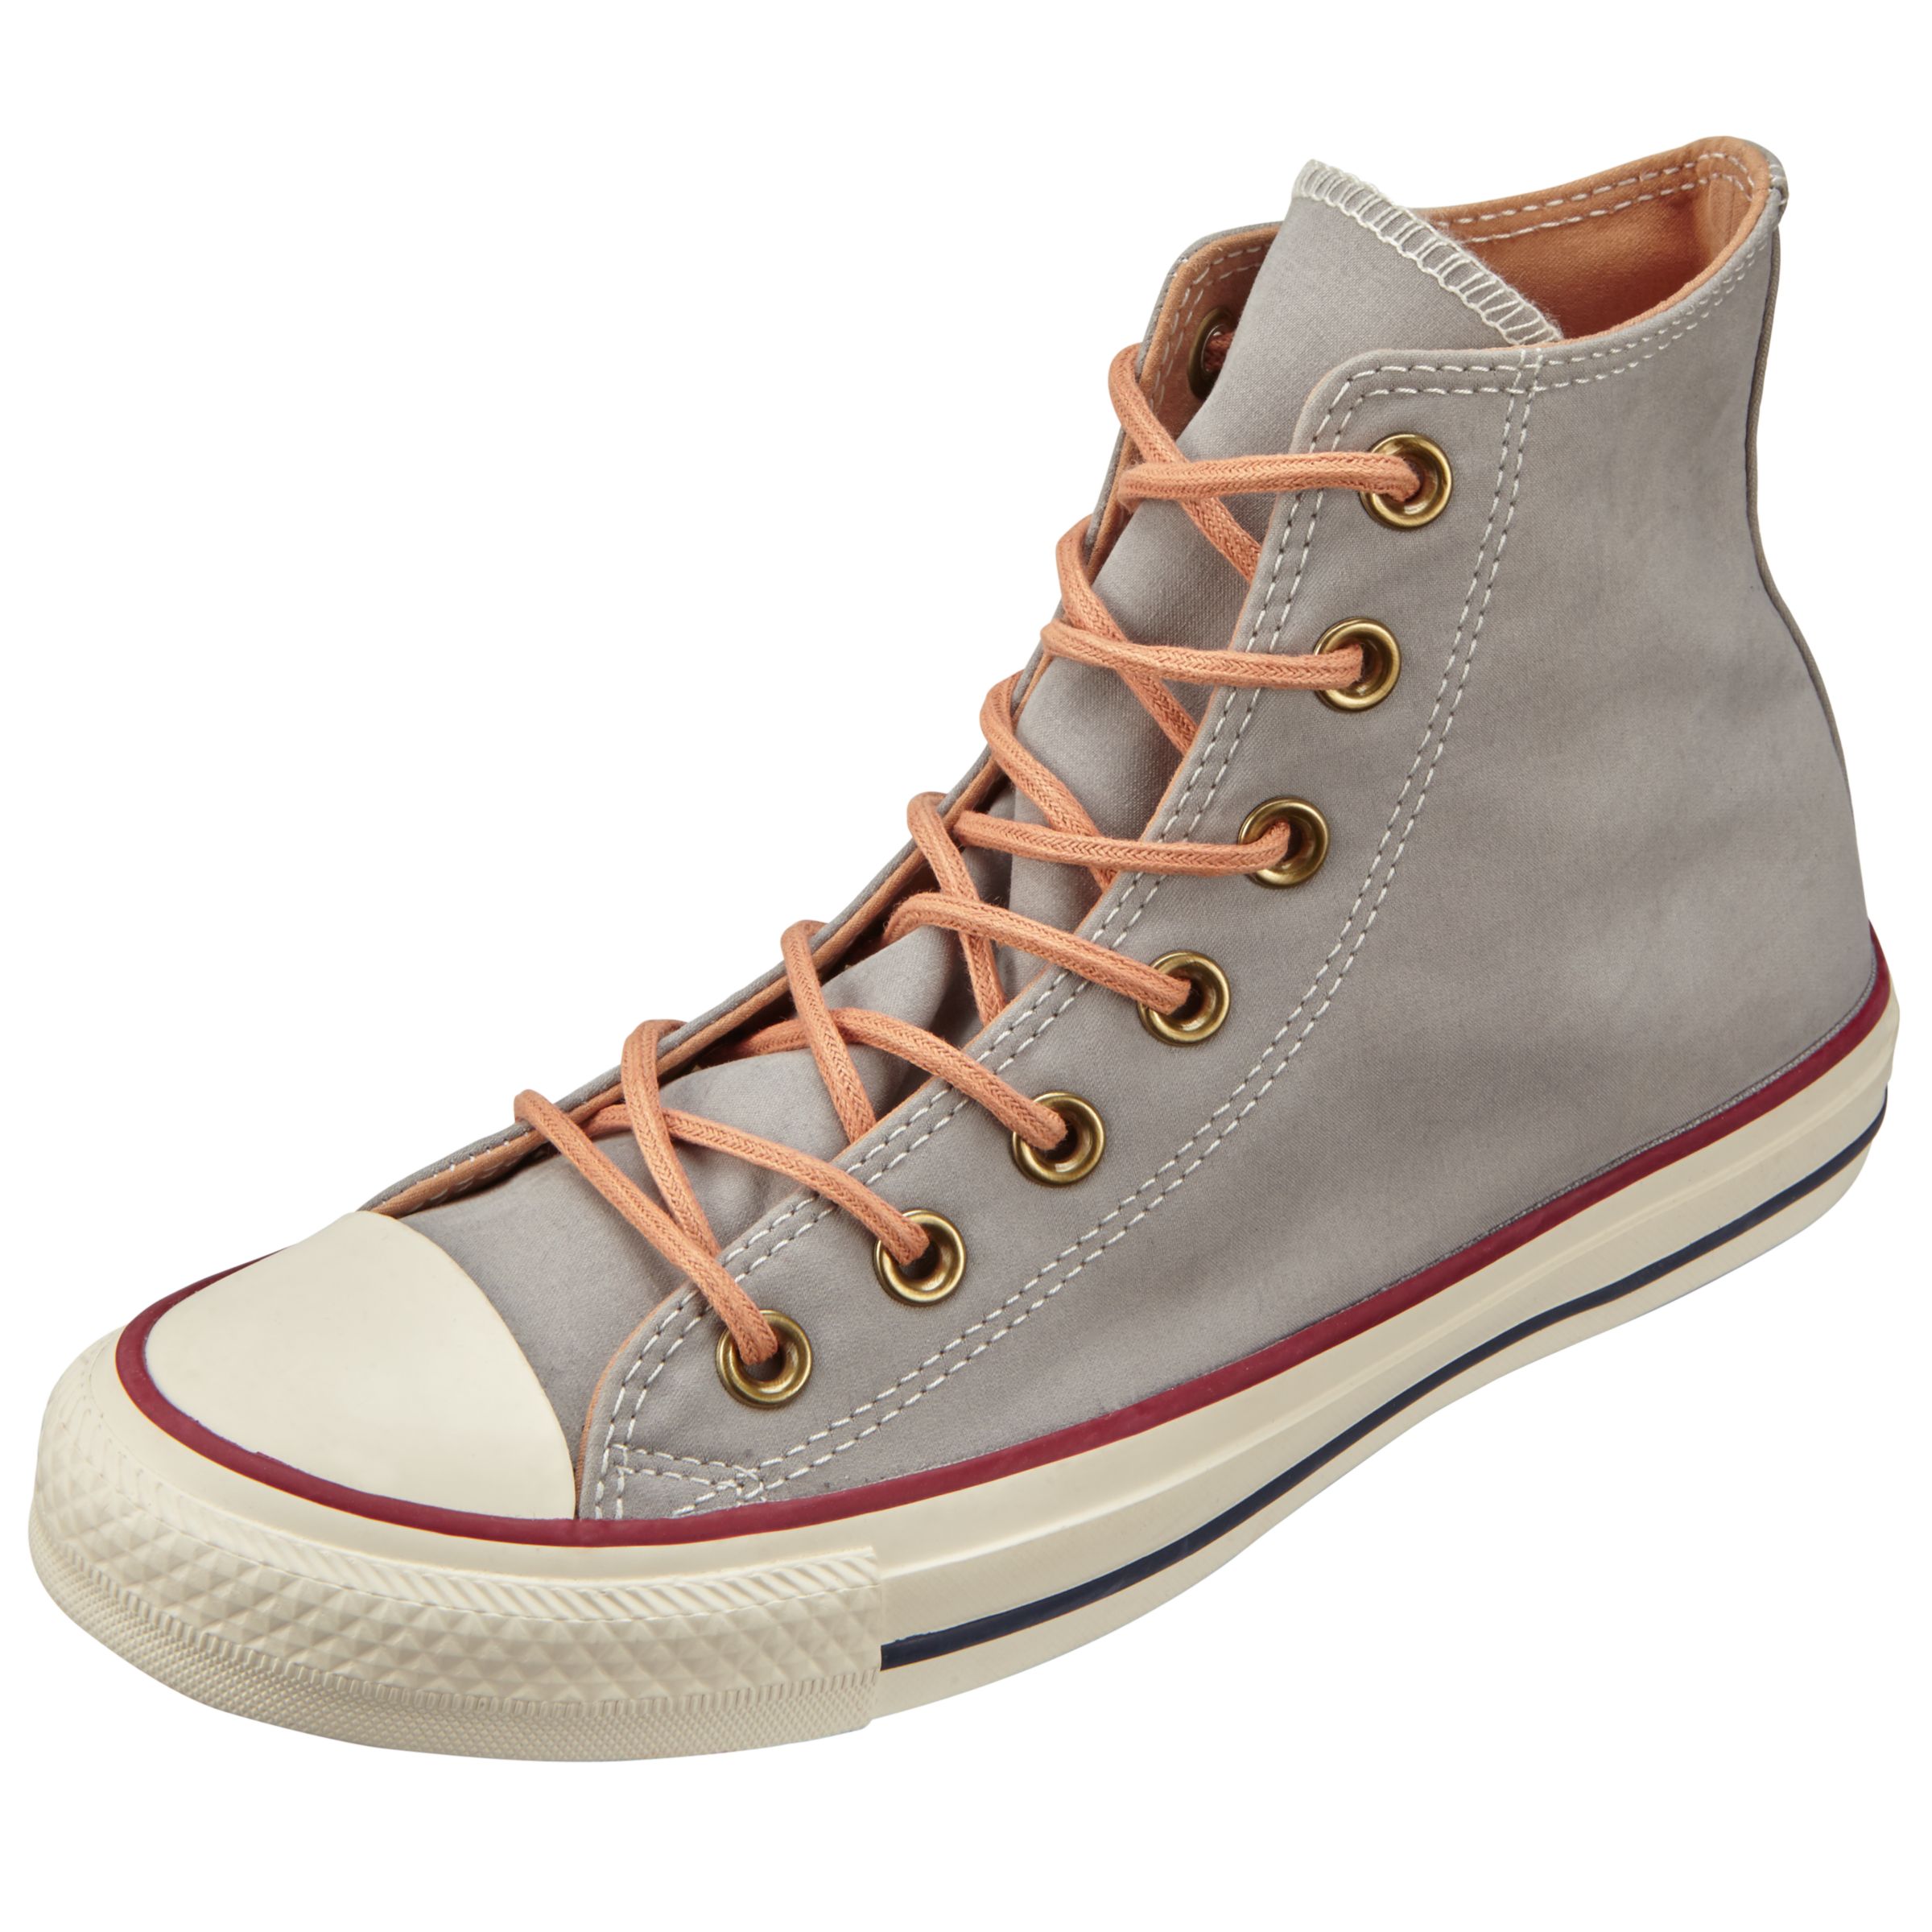 Converse Chuck Taylor All Star Peached Hi Top Trainers, Dolphin at John  Lewis \u0026 Partners